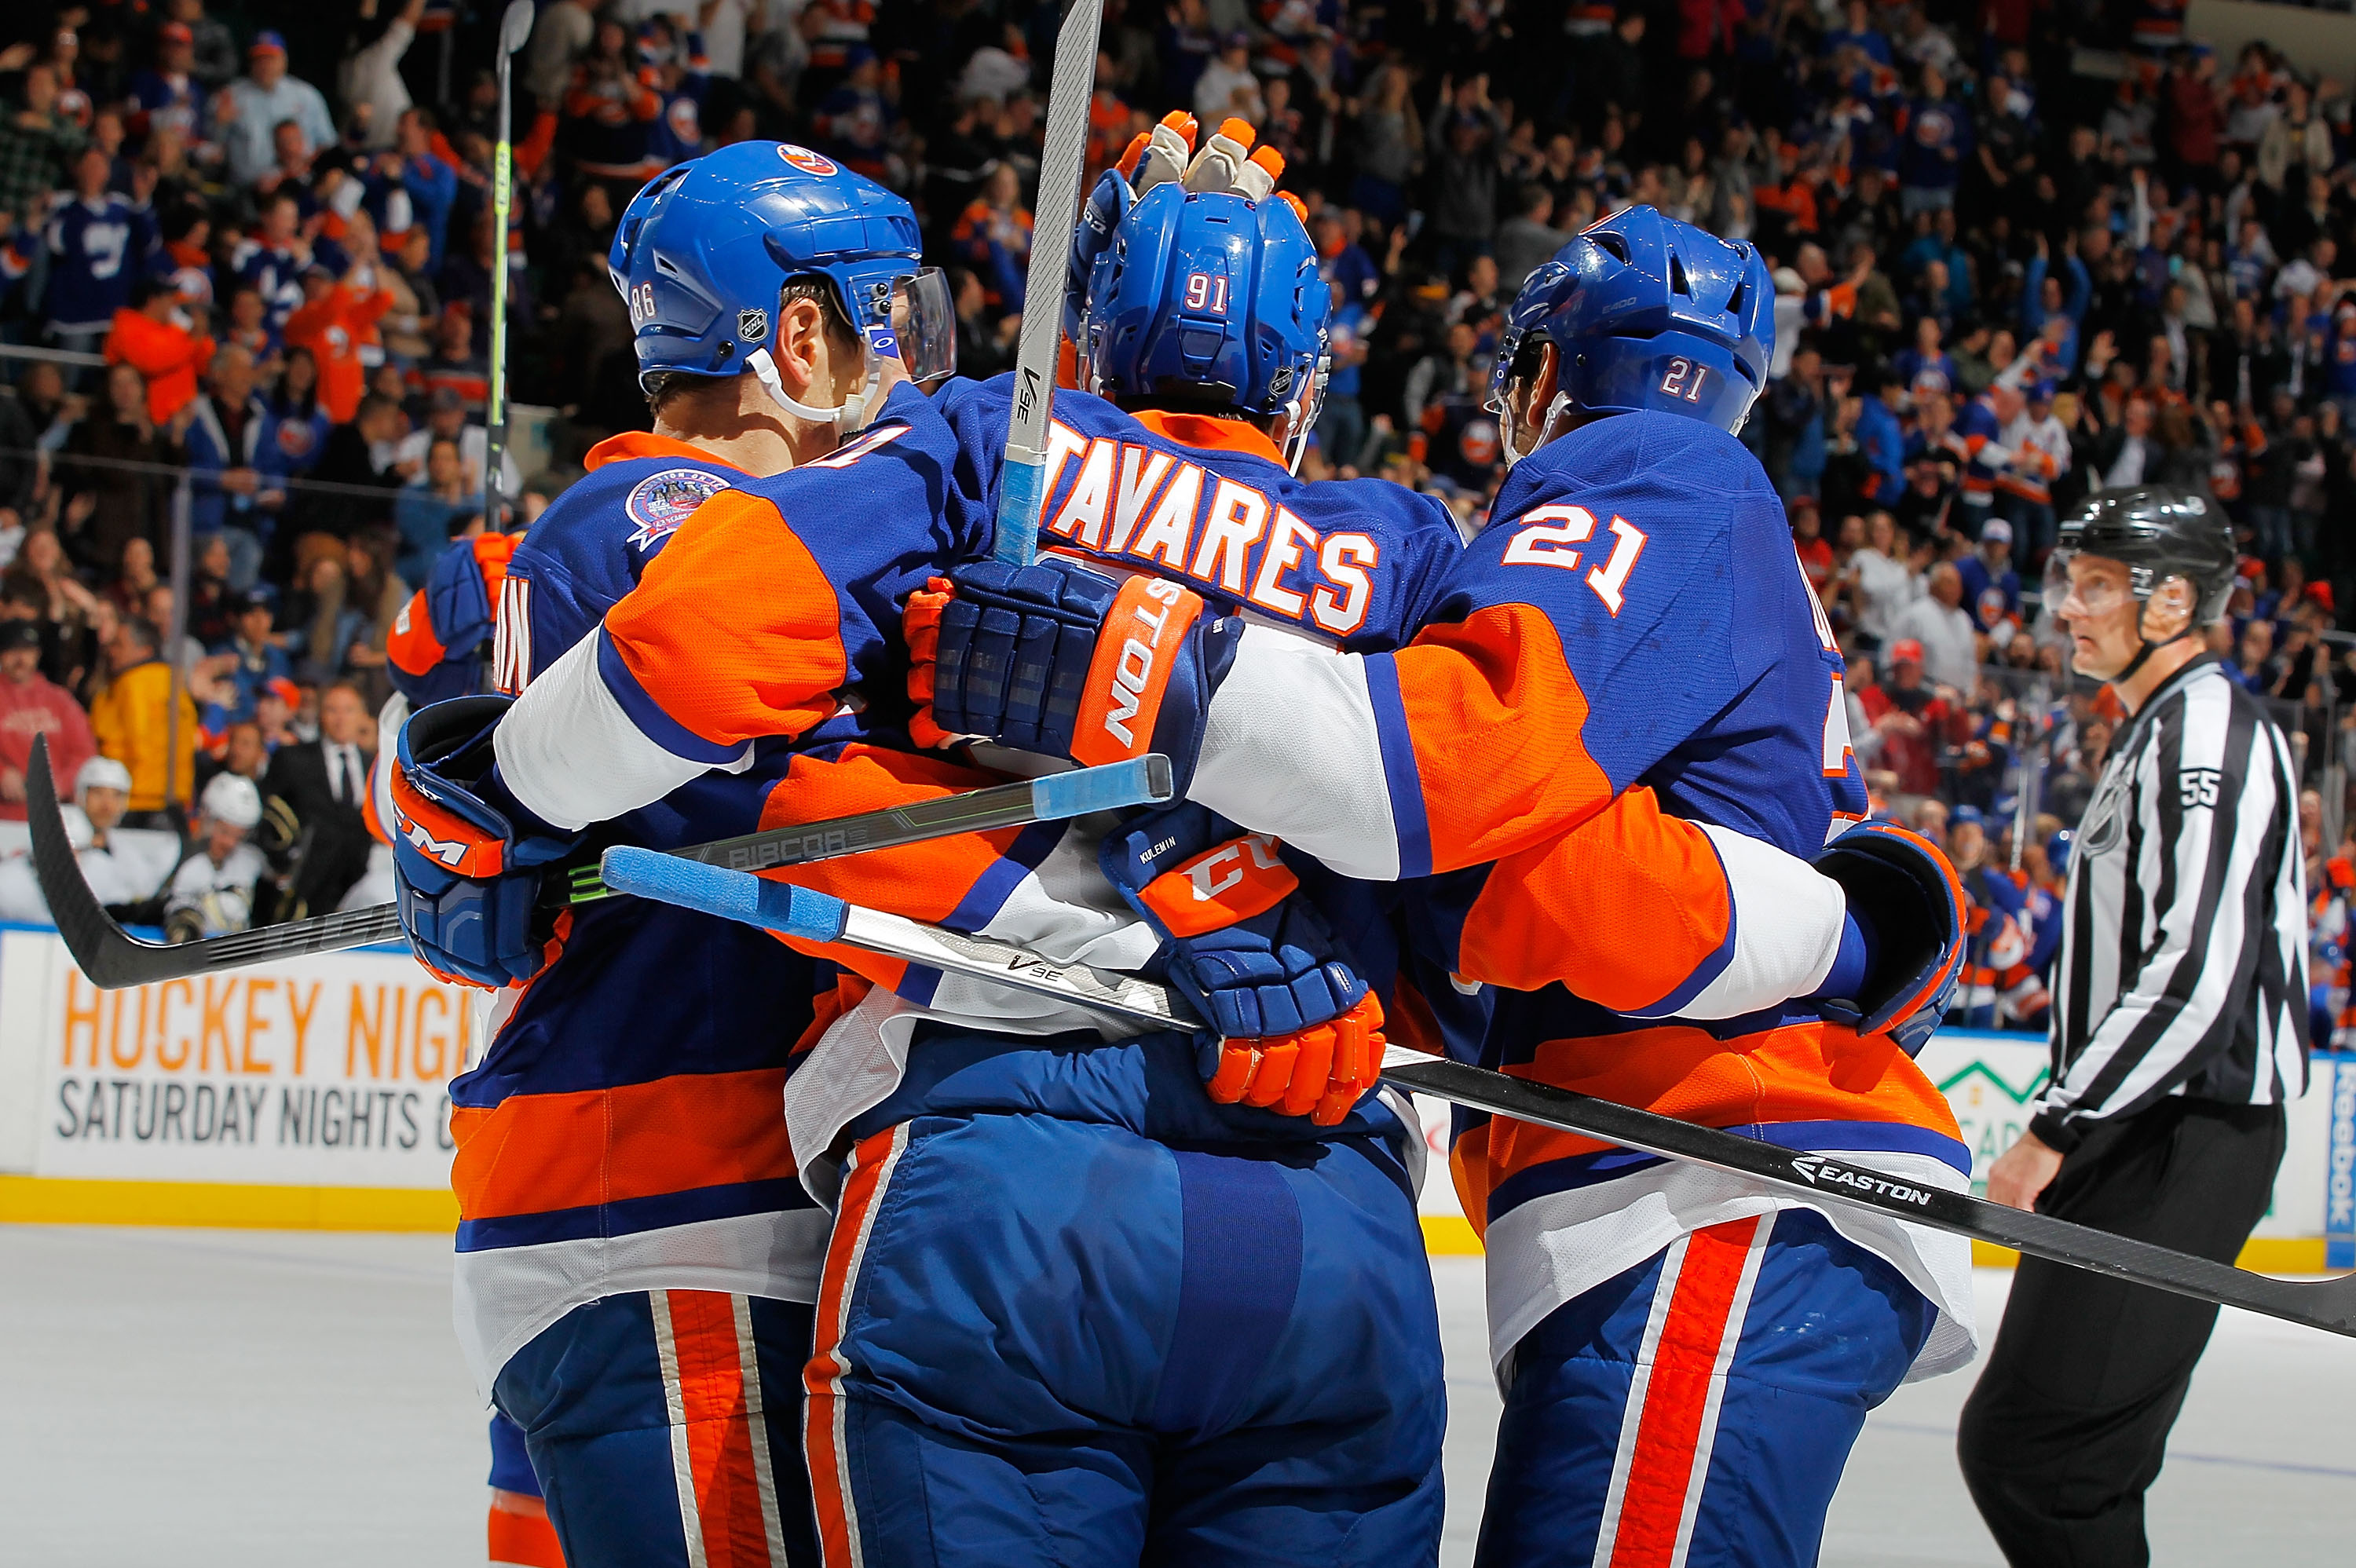 Sad ending to a once-promising hockey postseason for Rangers and Islanders  - Newsday